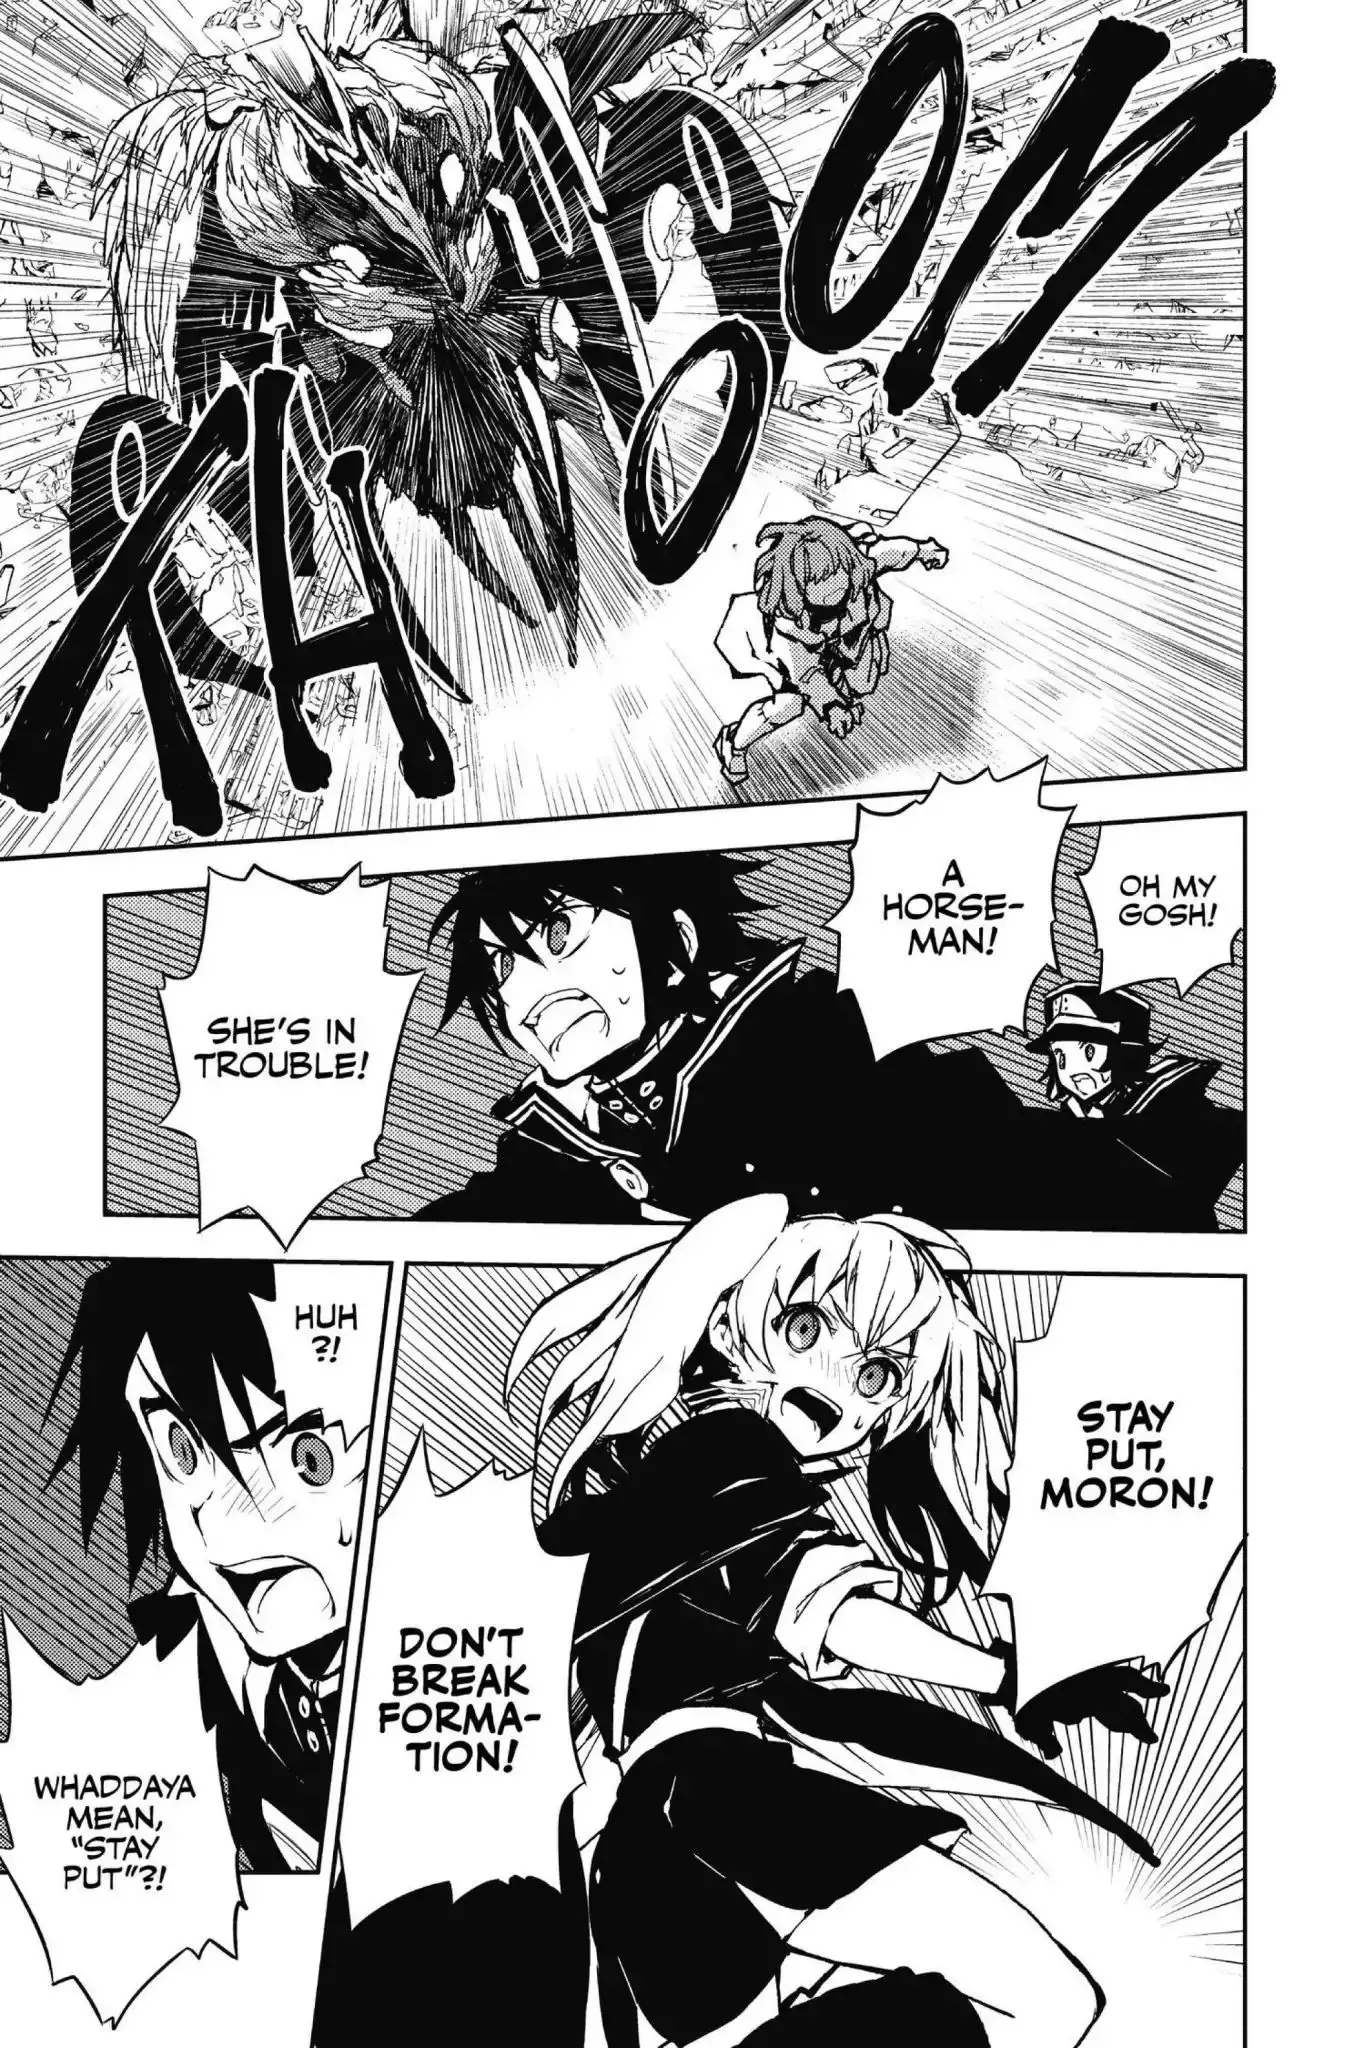 Seraph Of The End - 8 page 29-419c5cac